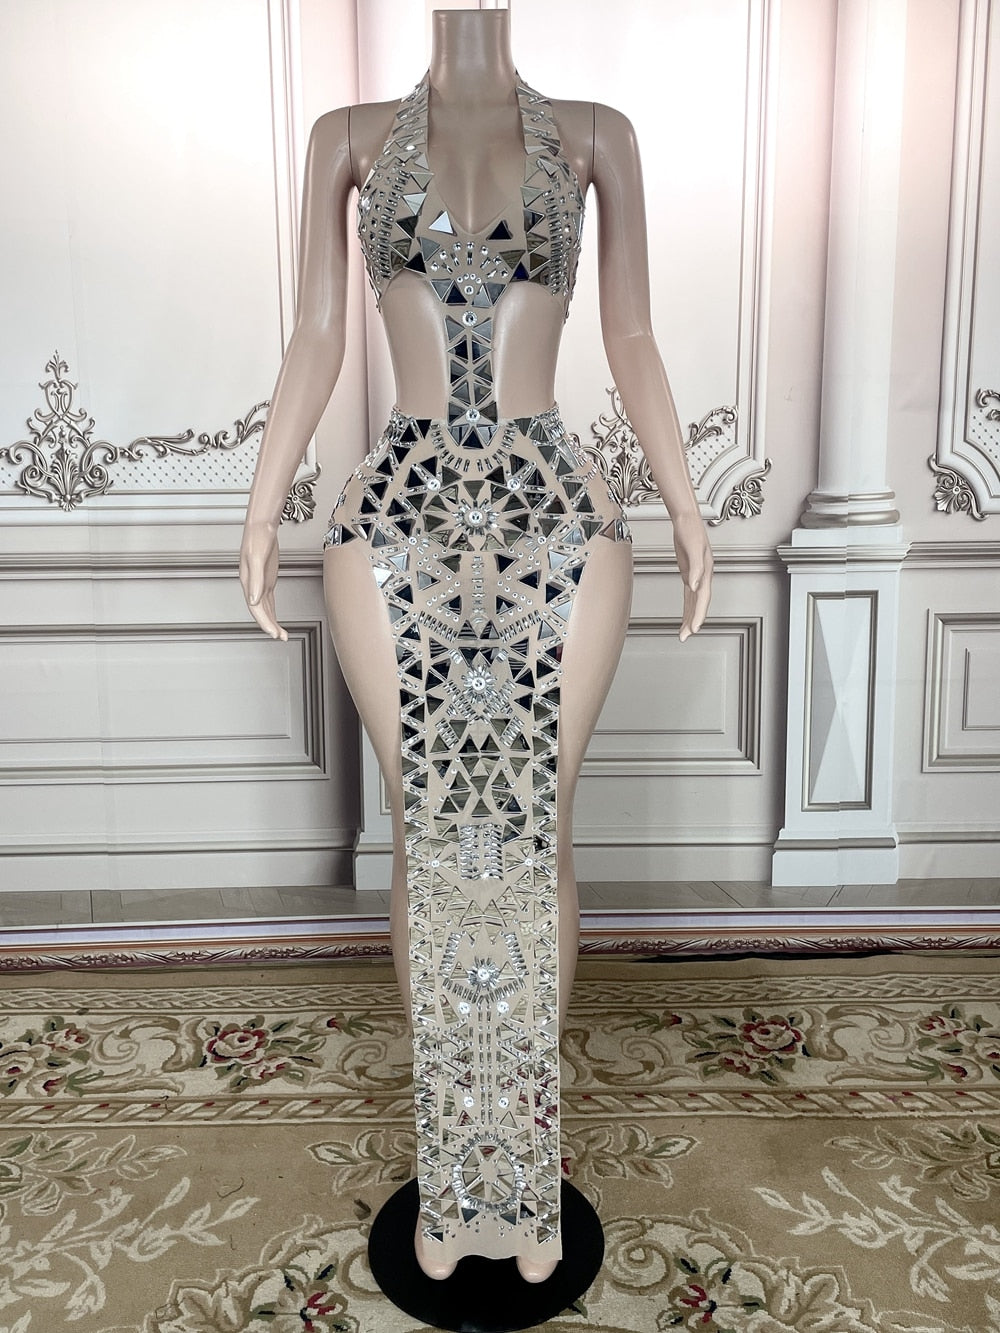 Sparkly Rhinestones Mirrors High Split Long Dress Women Stage Wear Sexy Performance Costume Evening Gown Prom Party Outfit